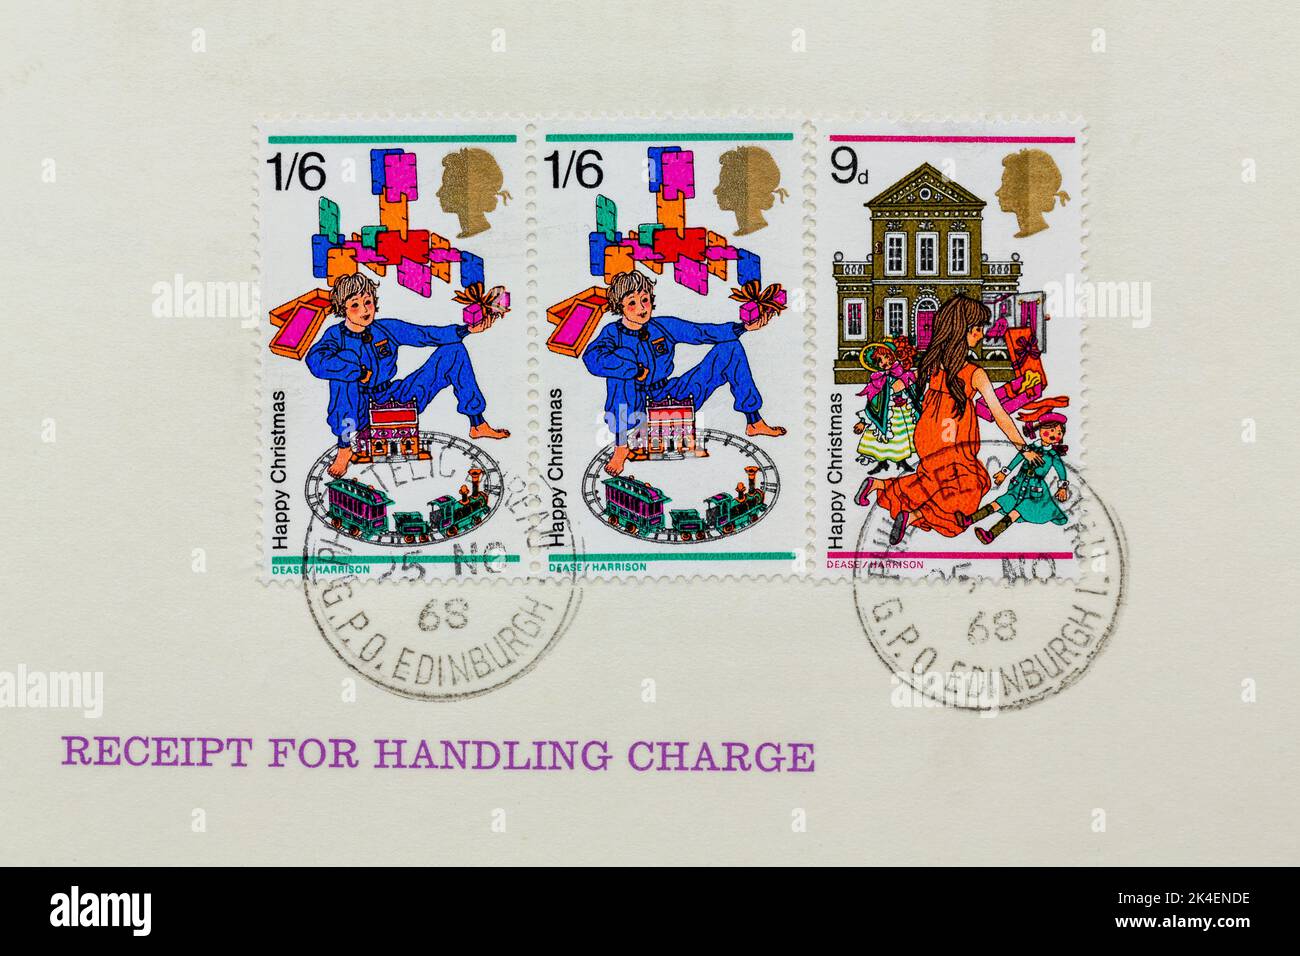 Set of 3 UK postage stamps from 1968. Stuck on a card used to provide a receipt for handling charge. Postmarked Philatelic Bureau Edinburgh GPO. Stock Photo